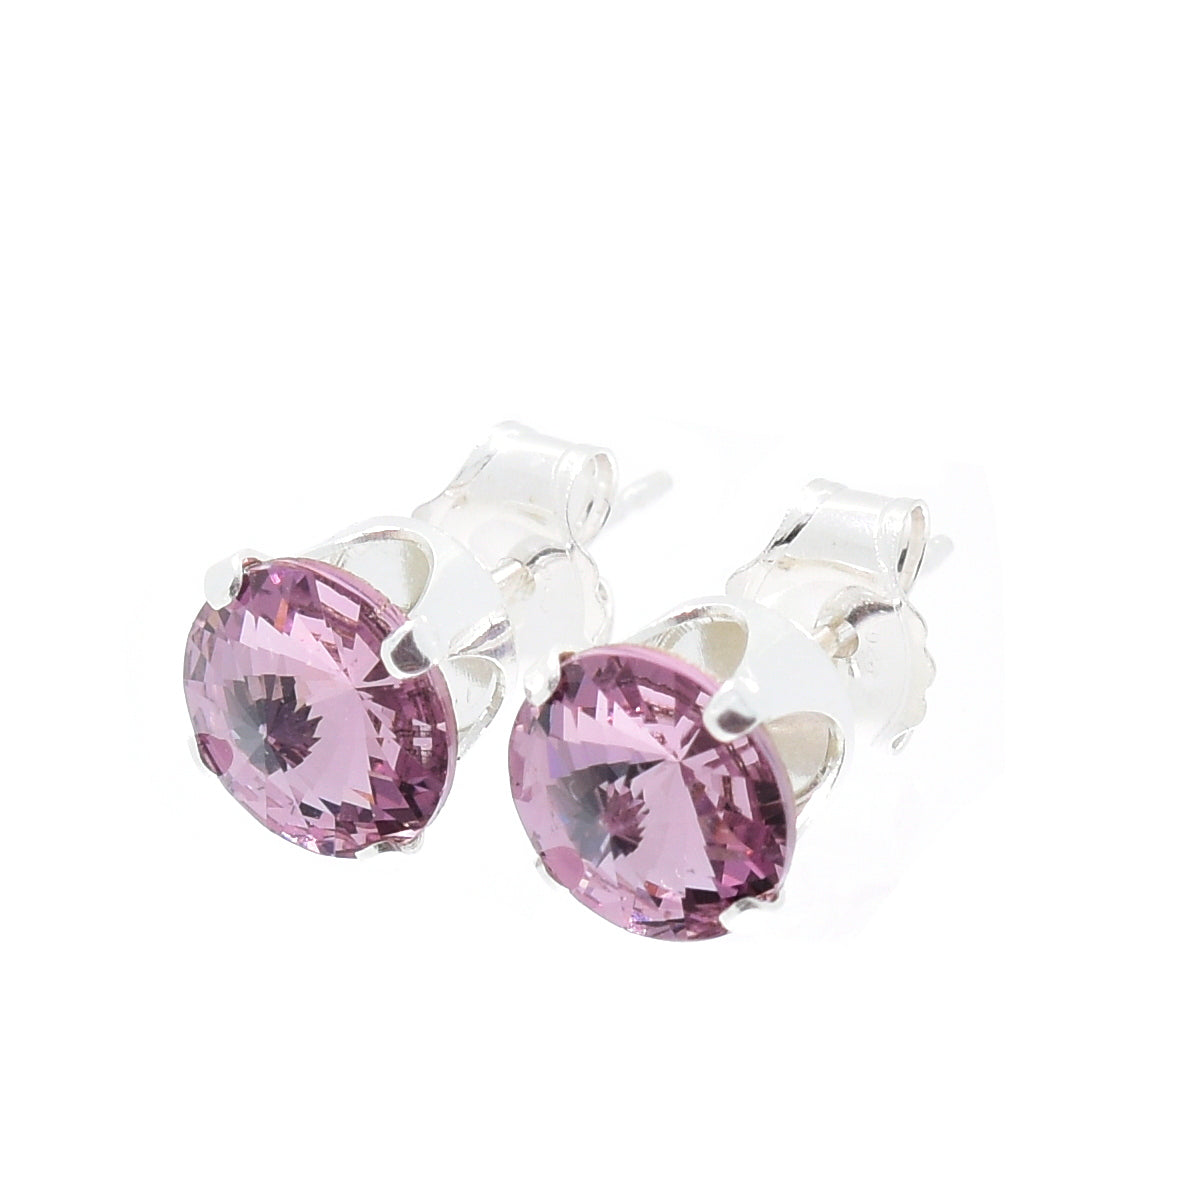 pewterhooter® Women's Classic Collection 925 Sterling silver earrings with brilliant Light Amethyst crystals, packaged in a gift box for any occasion.